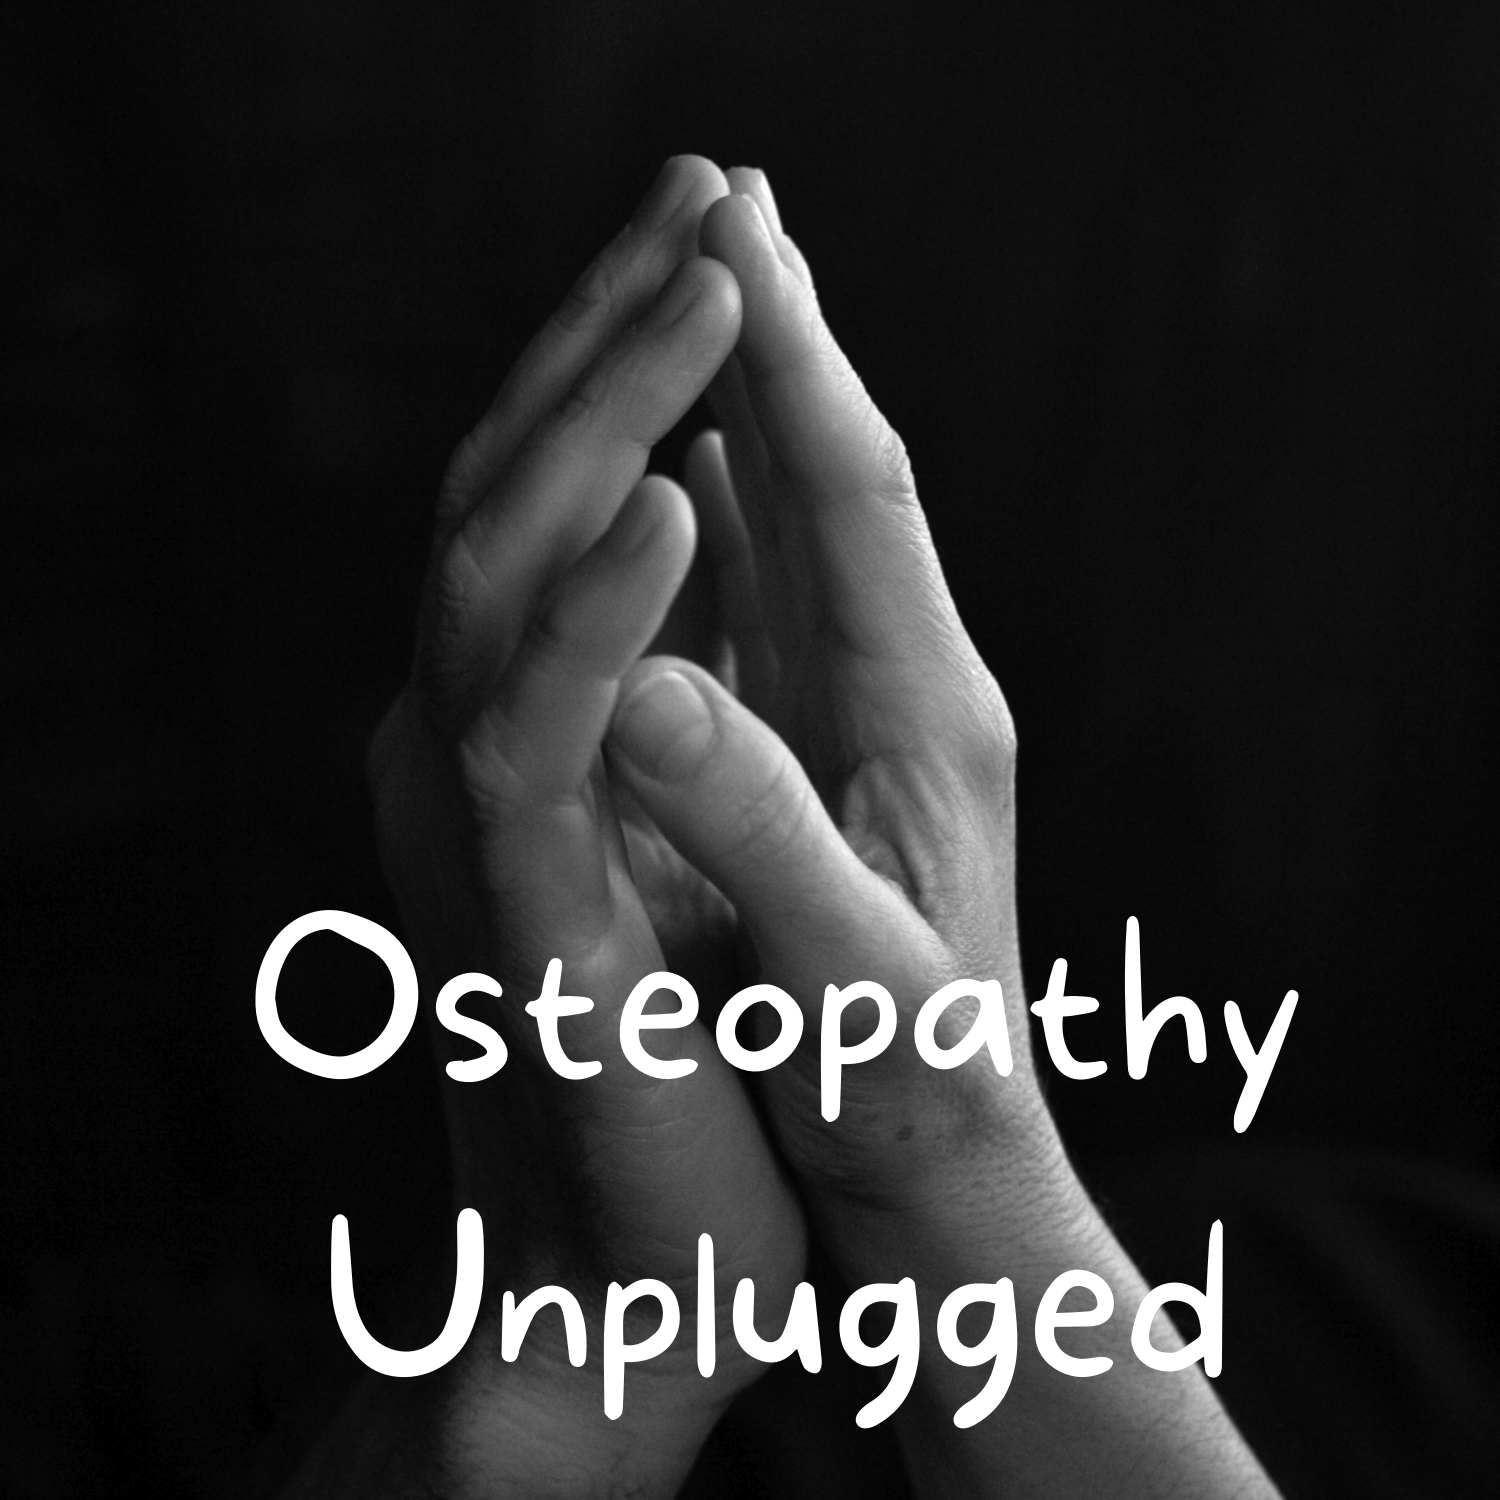 Episode 12 - I Promised To Listen: The Life of an Osteopath